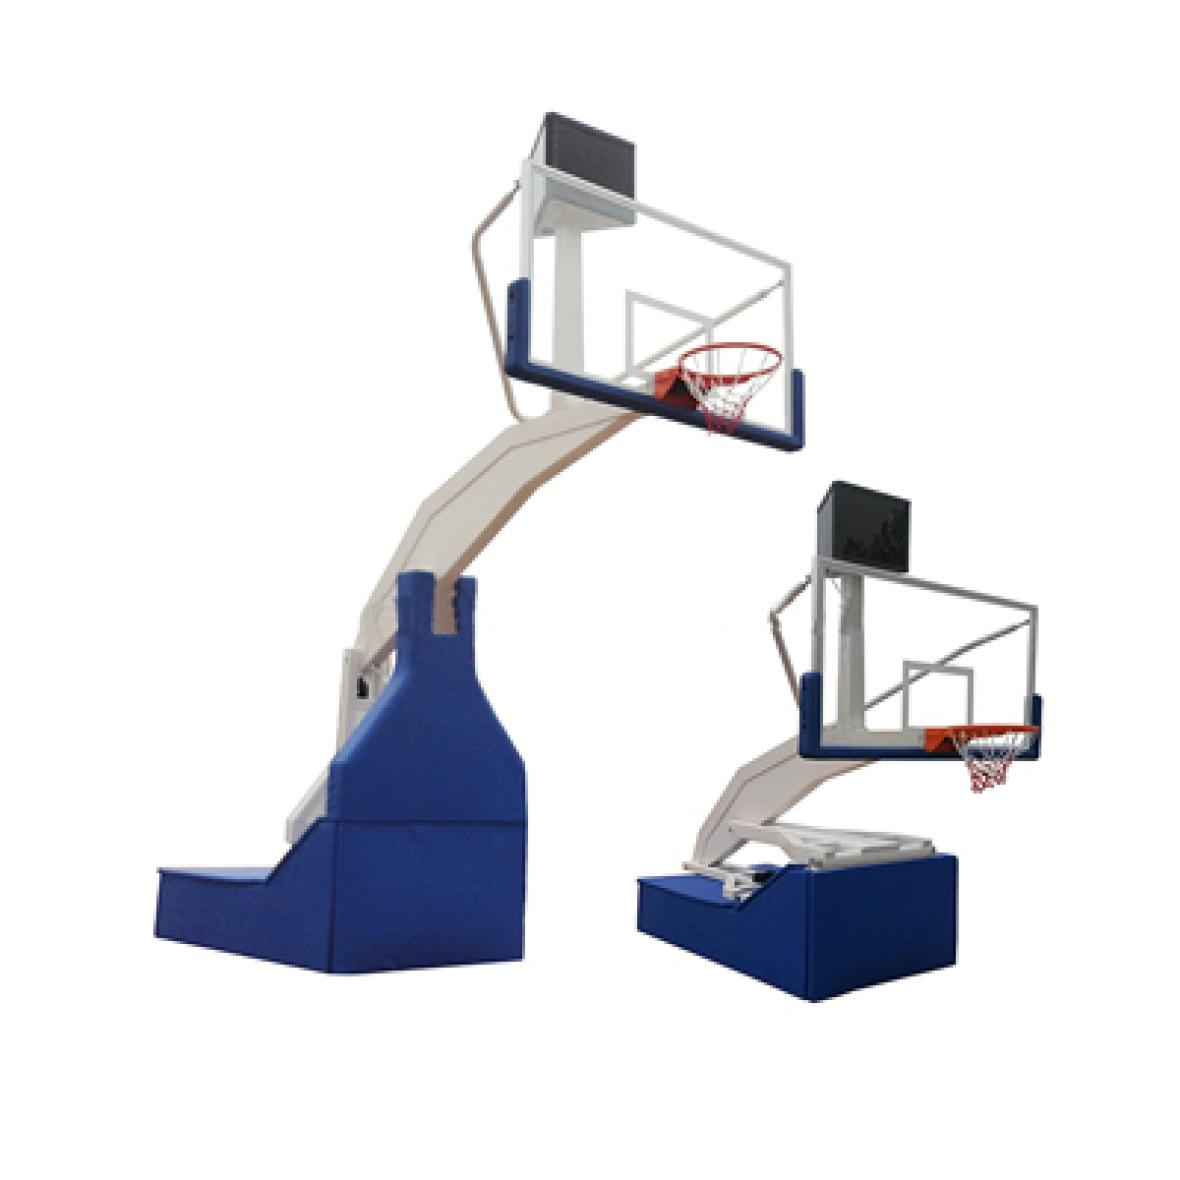 Height adjustable basketball stand from China manufacturer